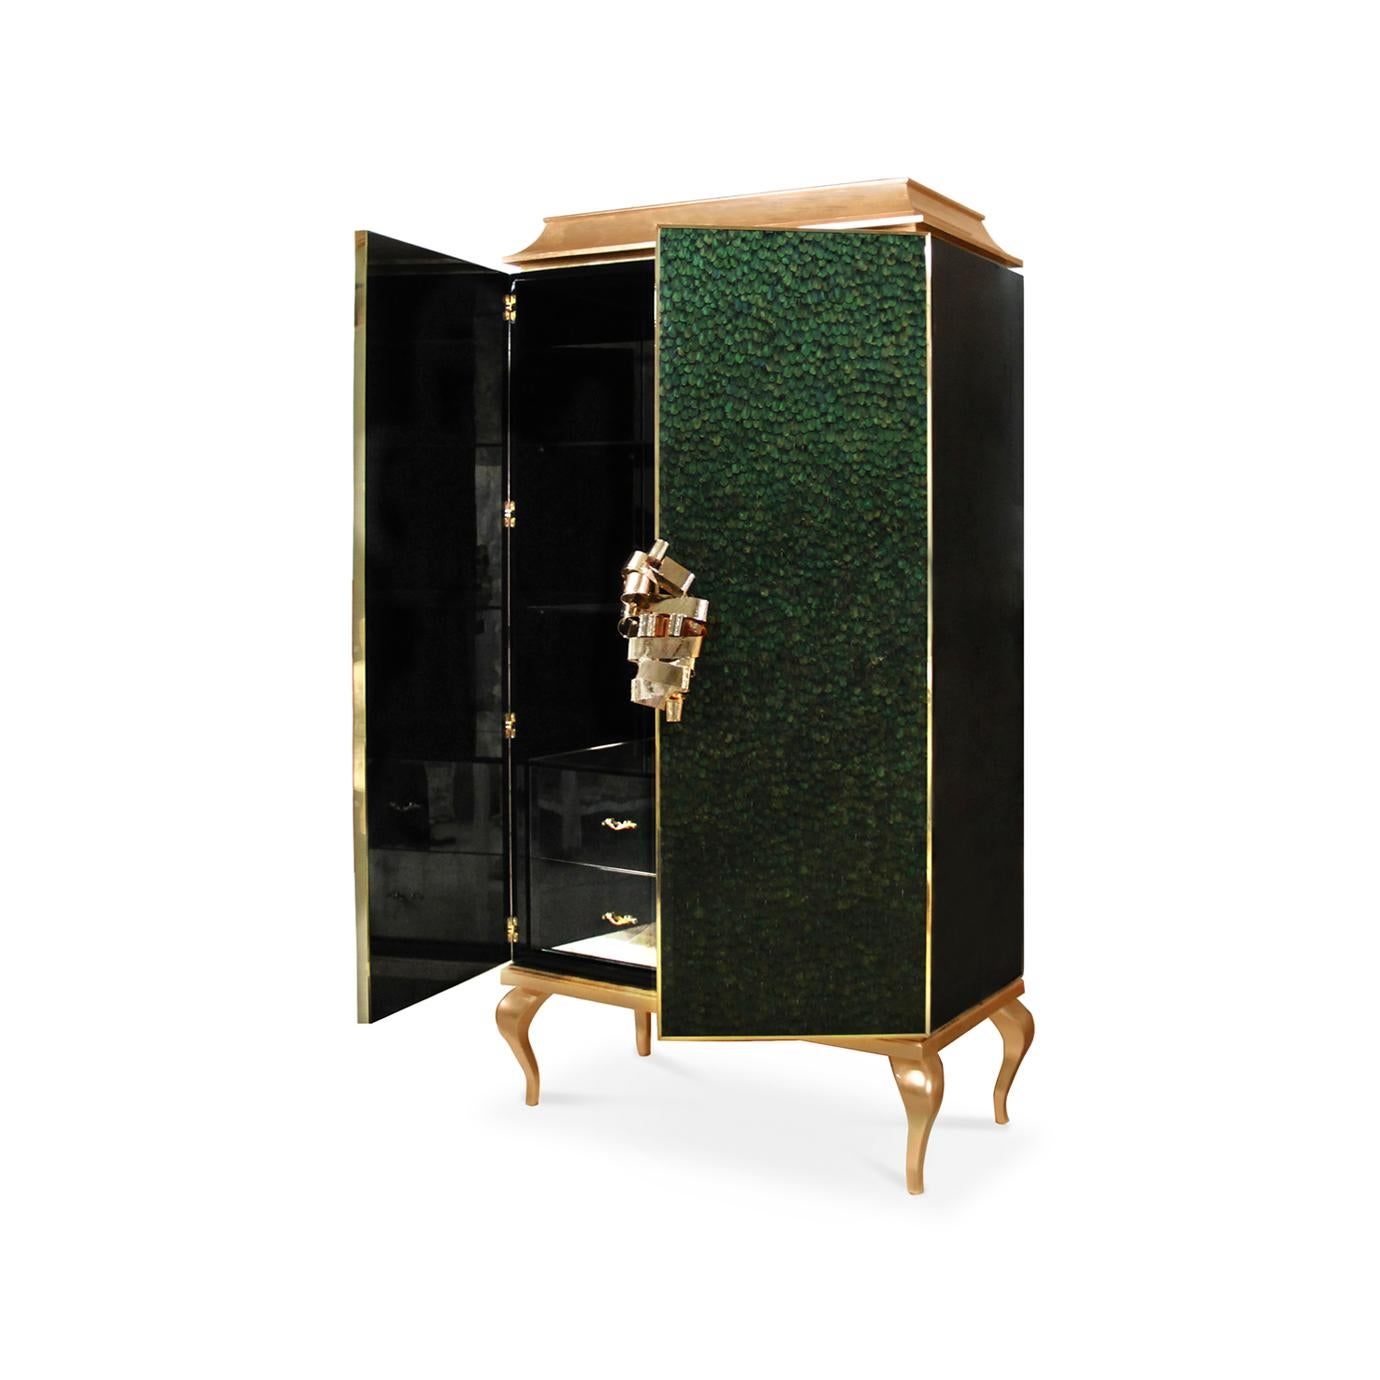 This utterly desirable double-door pagoda top armoire is covered in delicate, individually placed natural feathers. An exquisite metal ribbon opens the doors to a lavish interior graced with four drawers and two adjustable shelves. The top and base